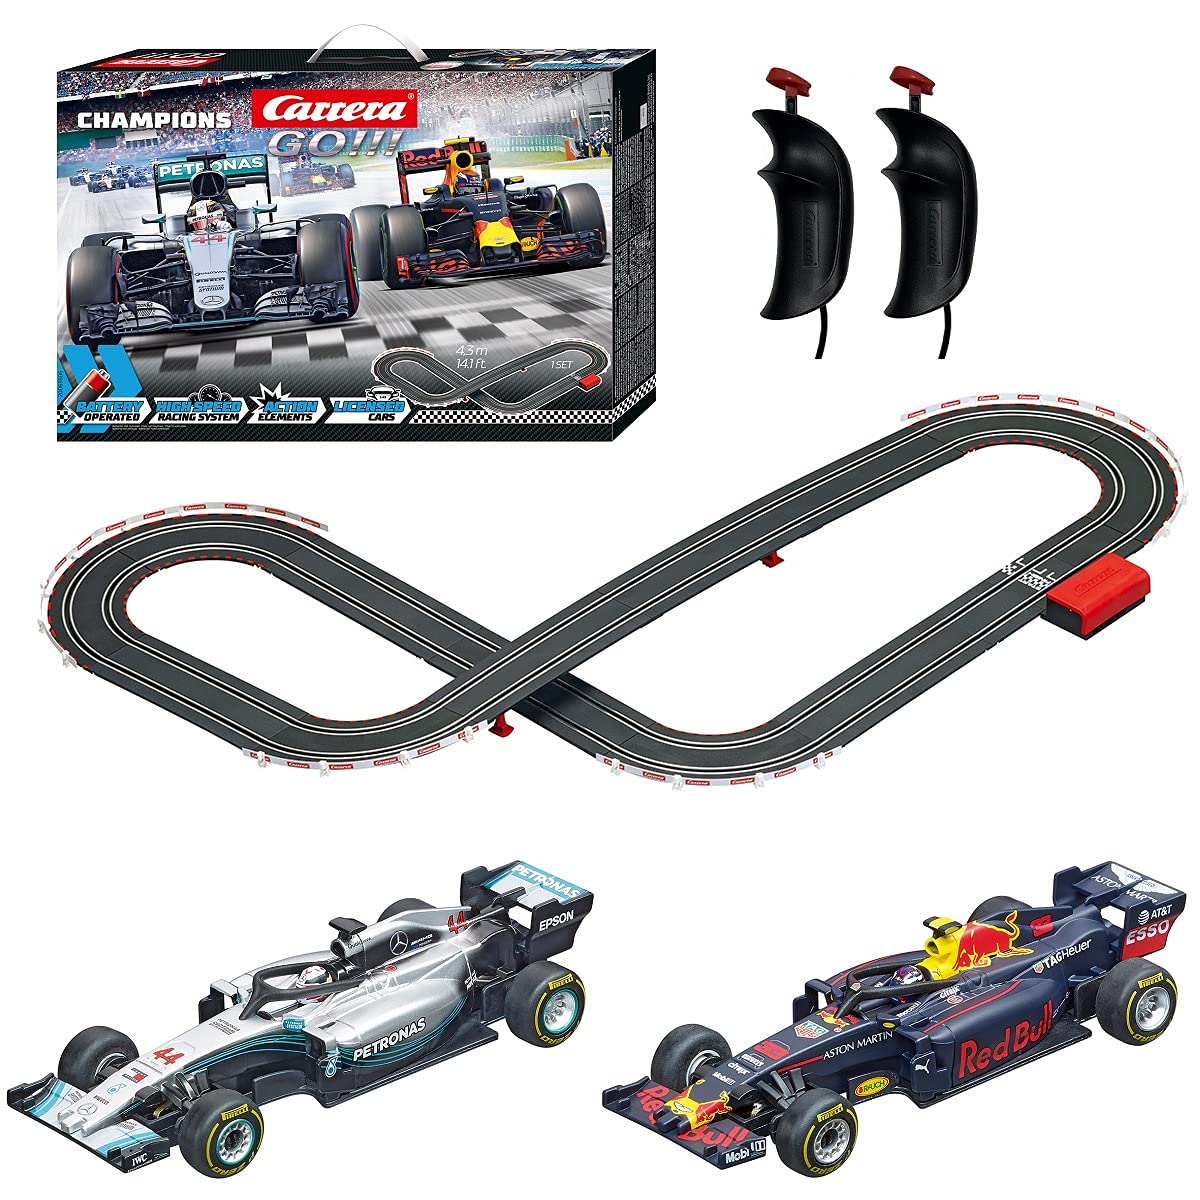 Carrera GO!!! 20063506 Champions 1:43 Scale Slot Car Racing Toy